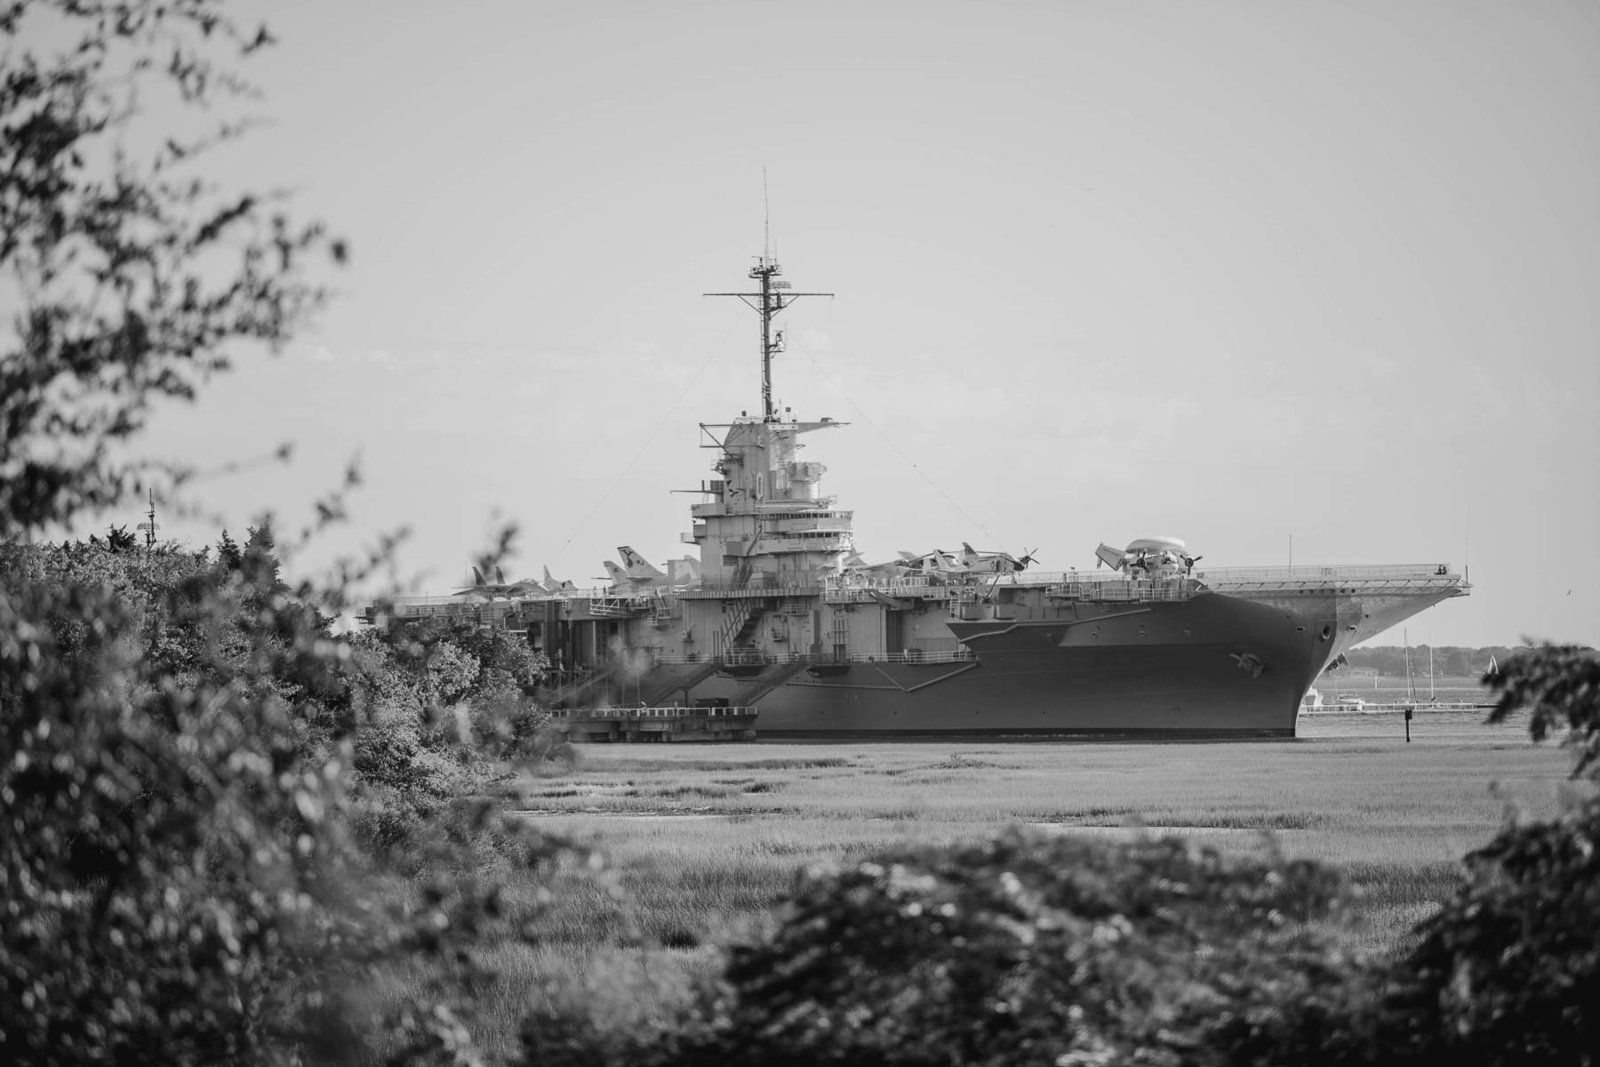 Uss Yorktown can be seen from ceremony site, Harborside East, Mt Pleasant, South Carolina